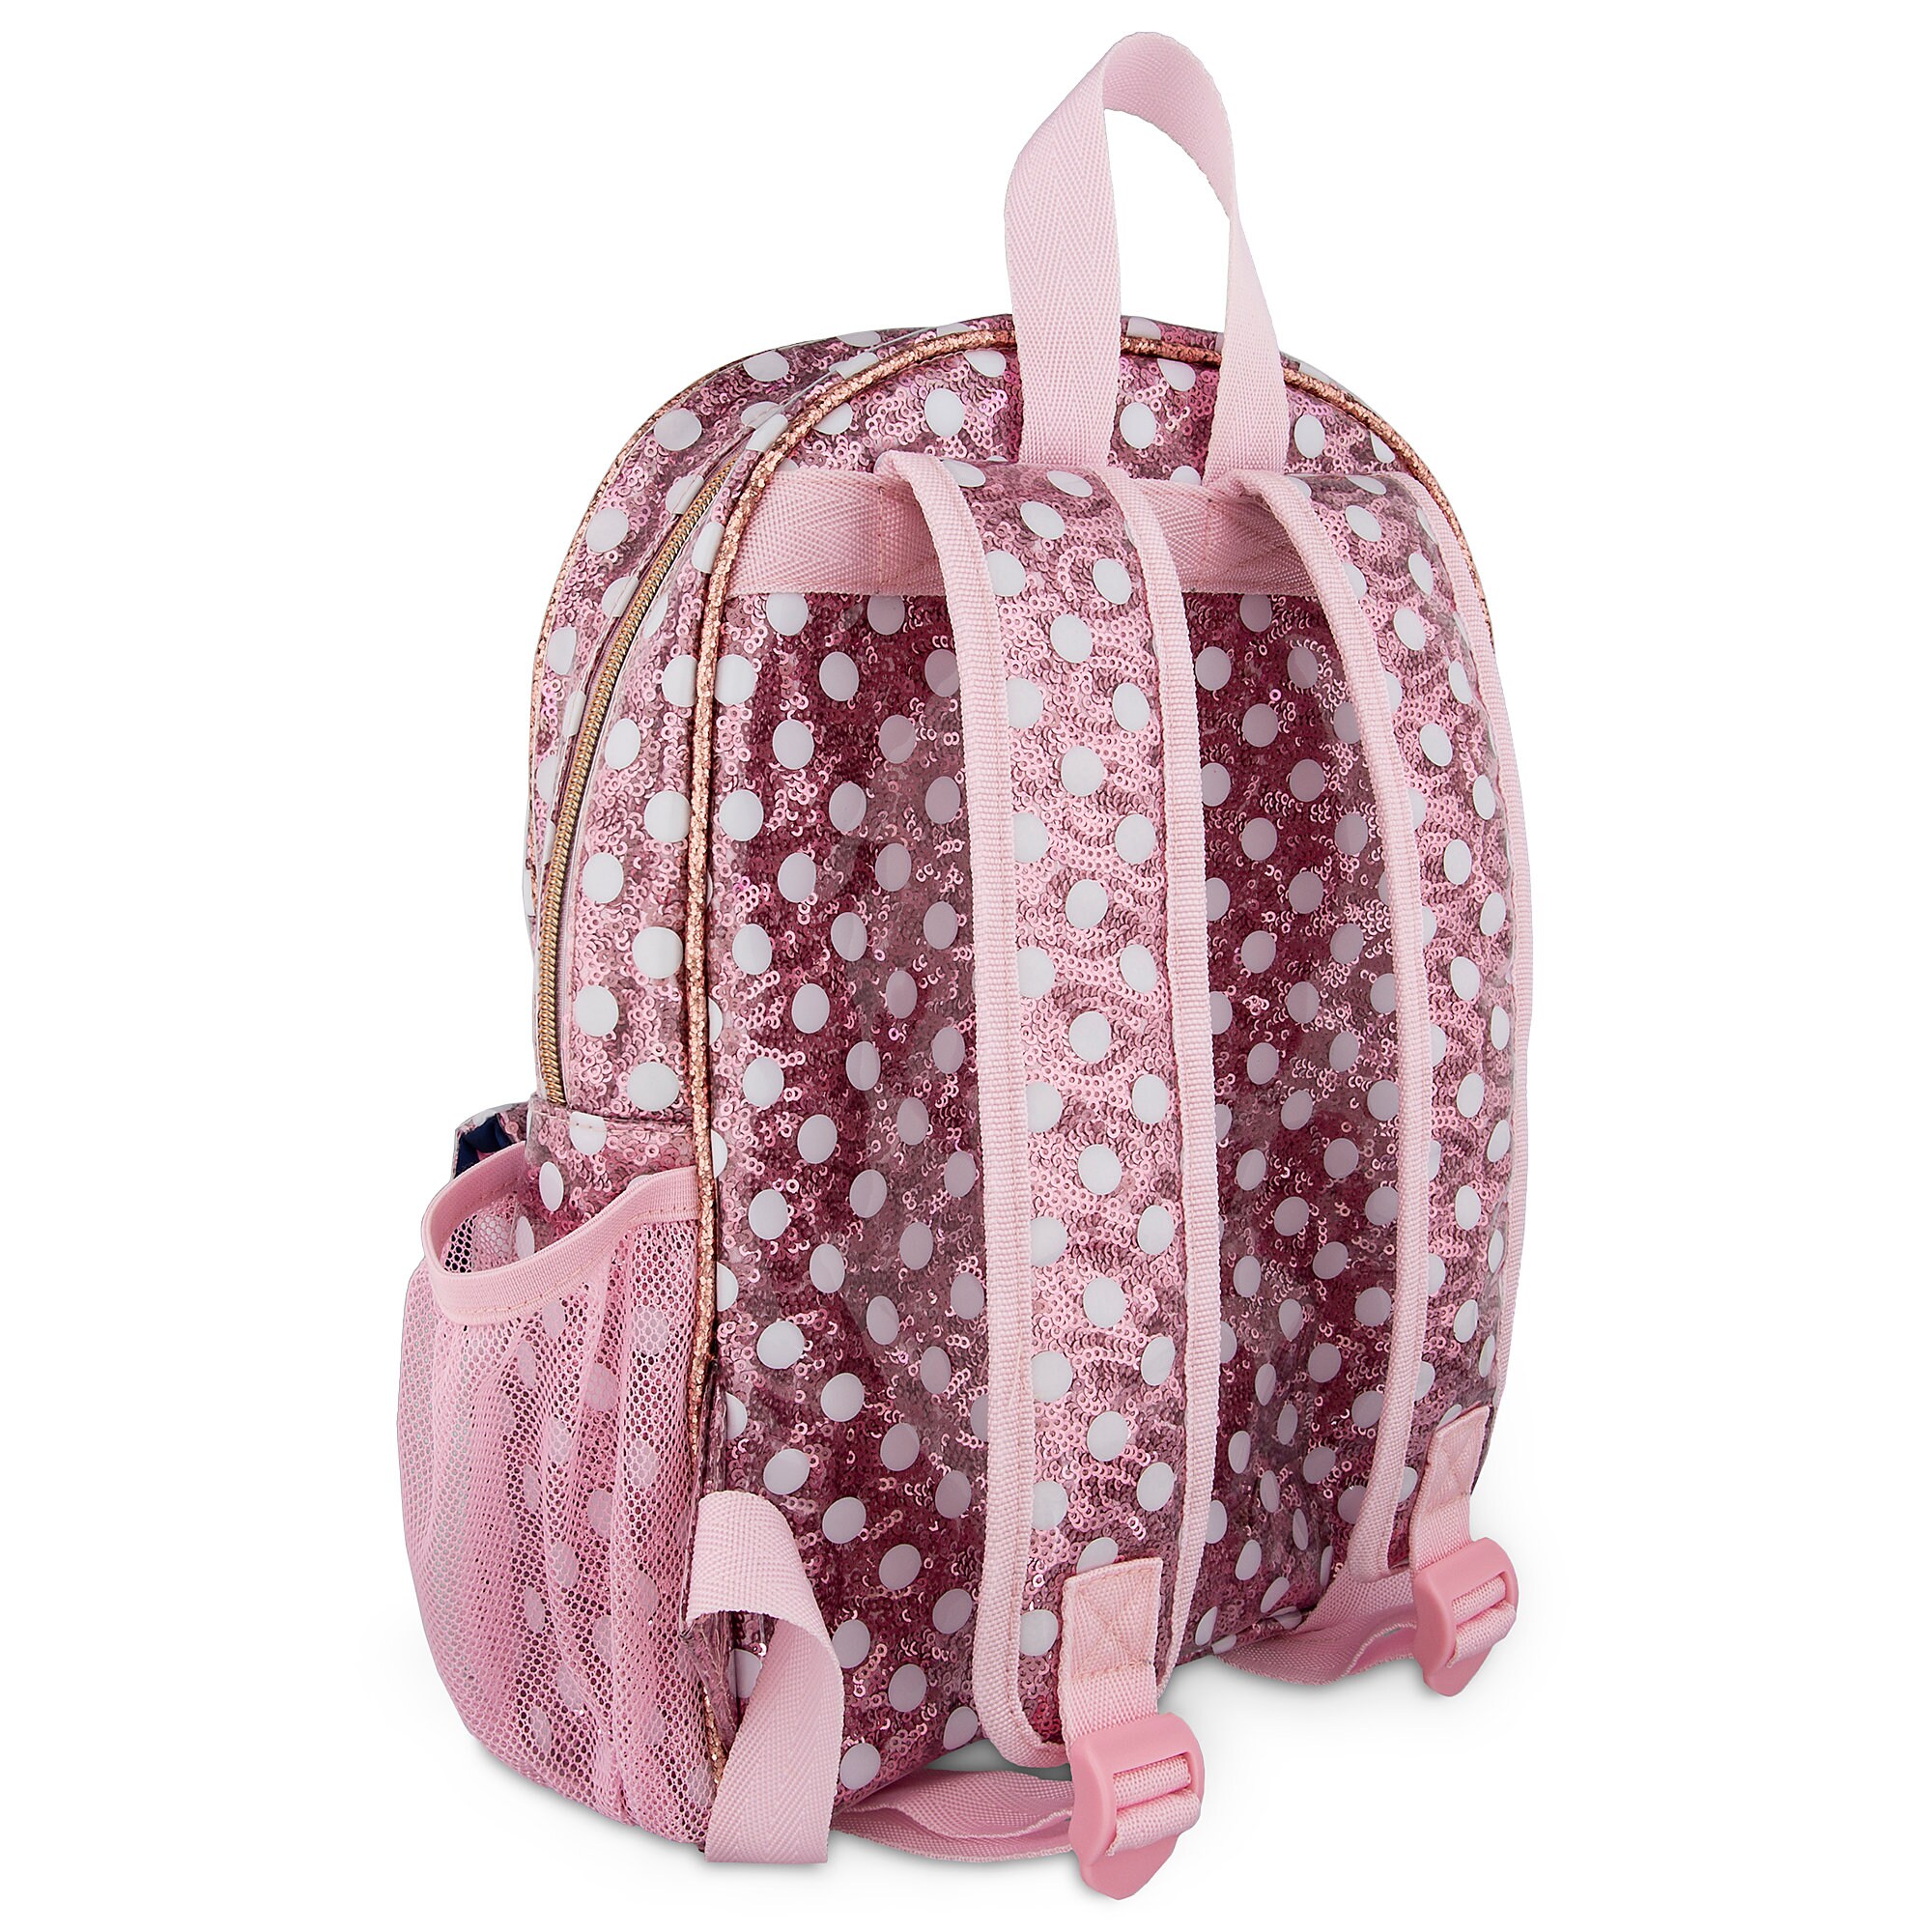 Minnie Mouse Sequined Backpack